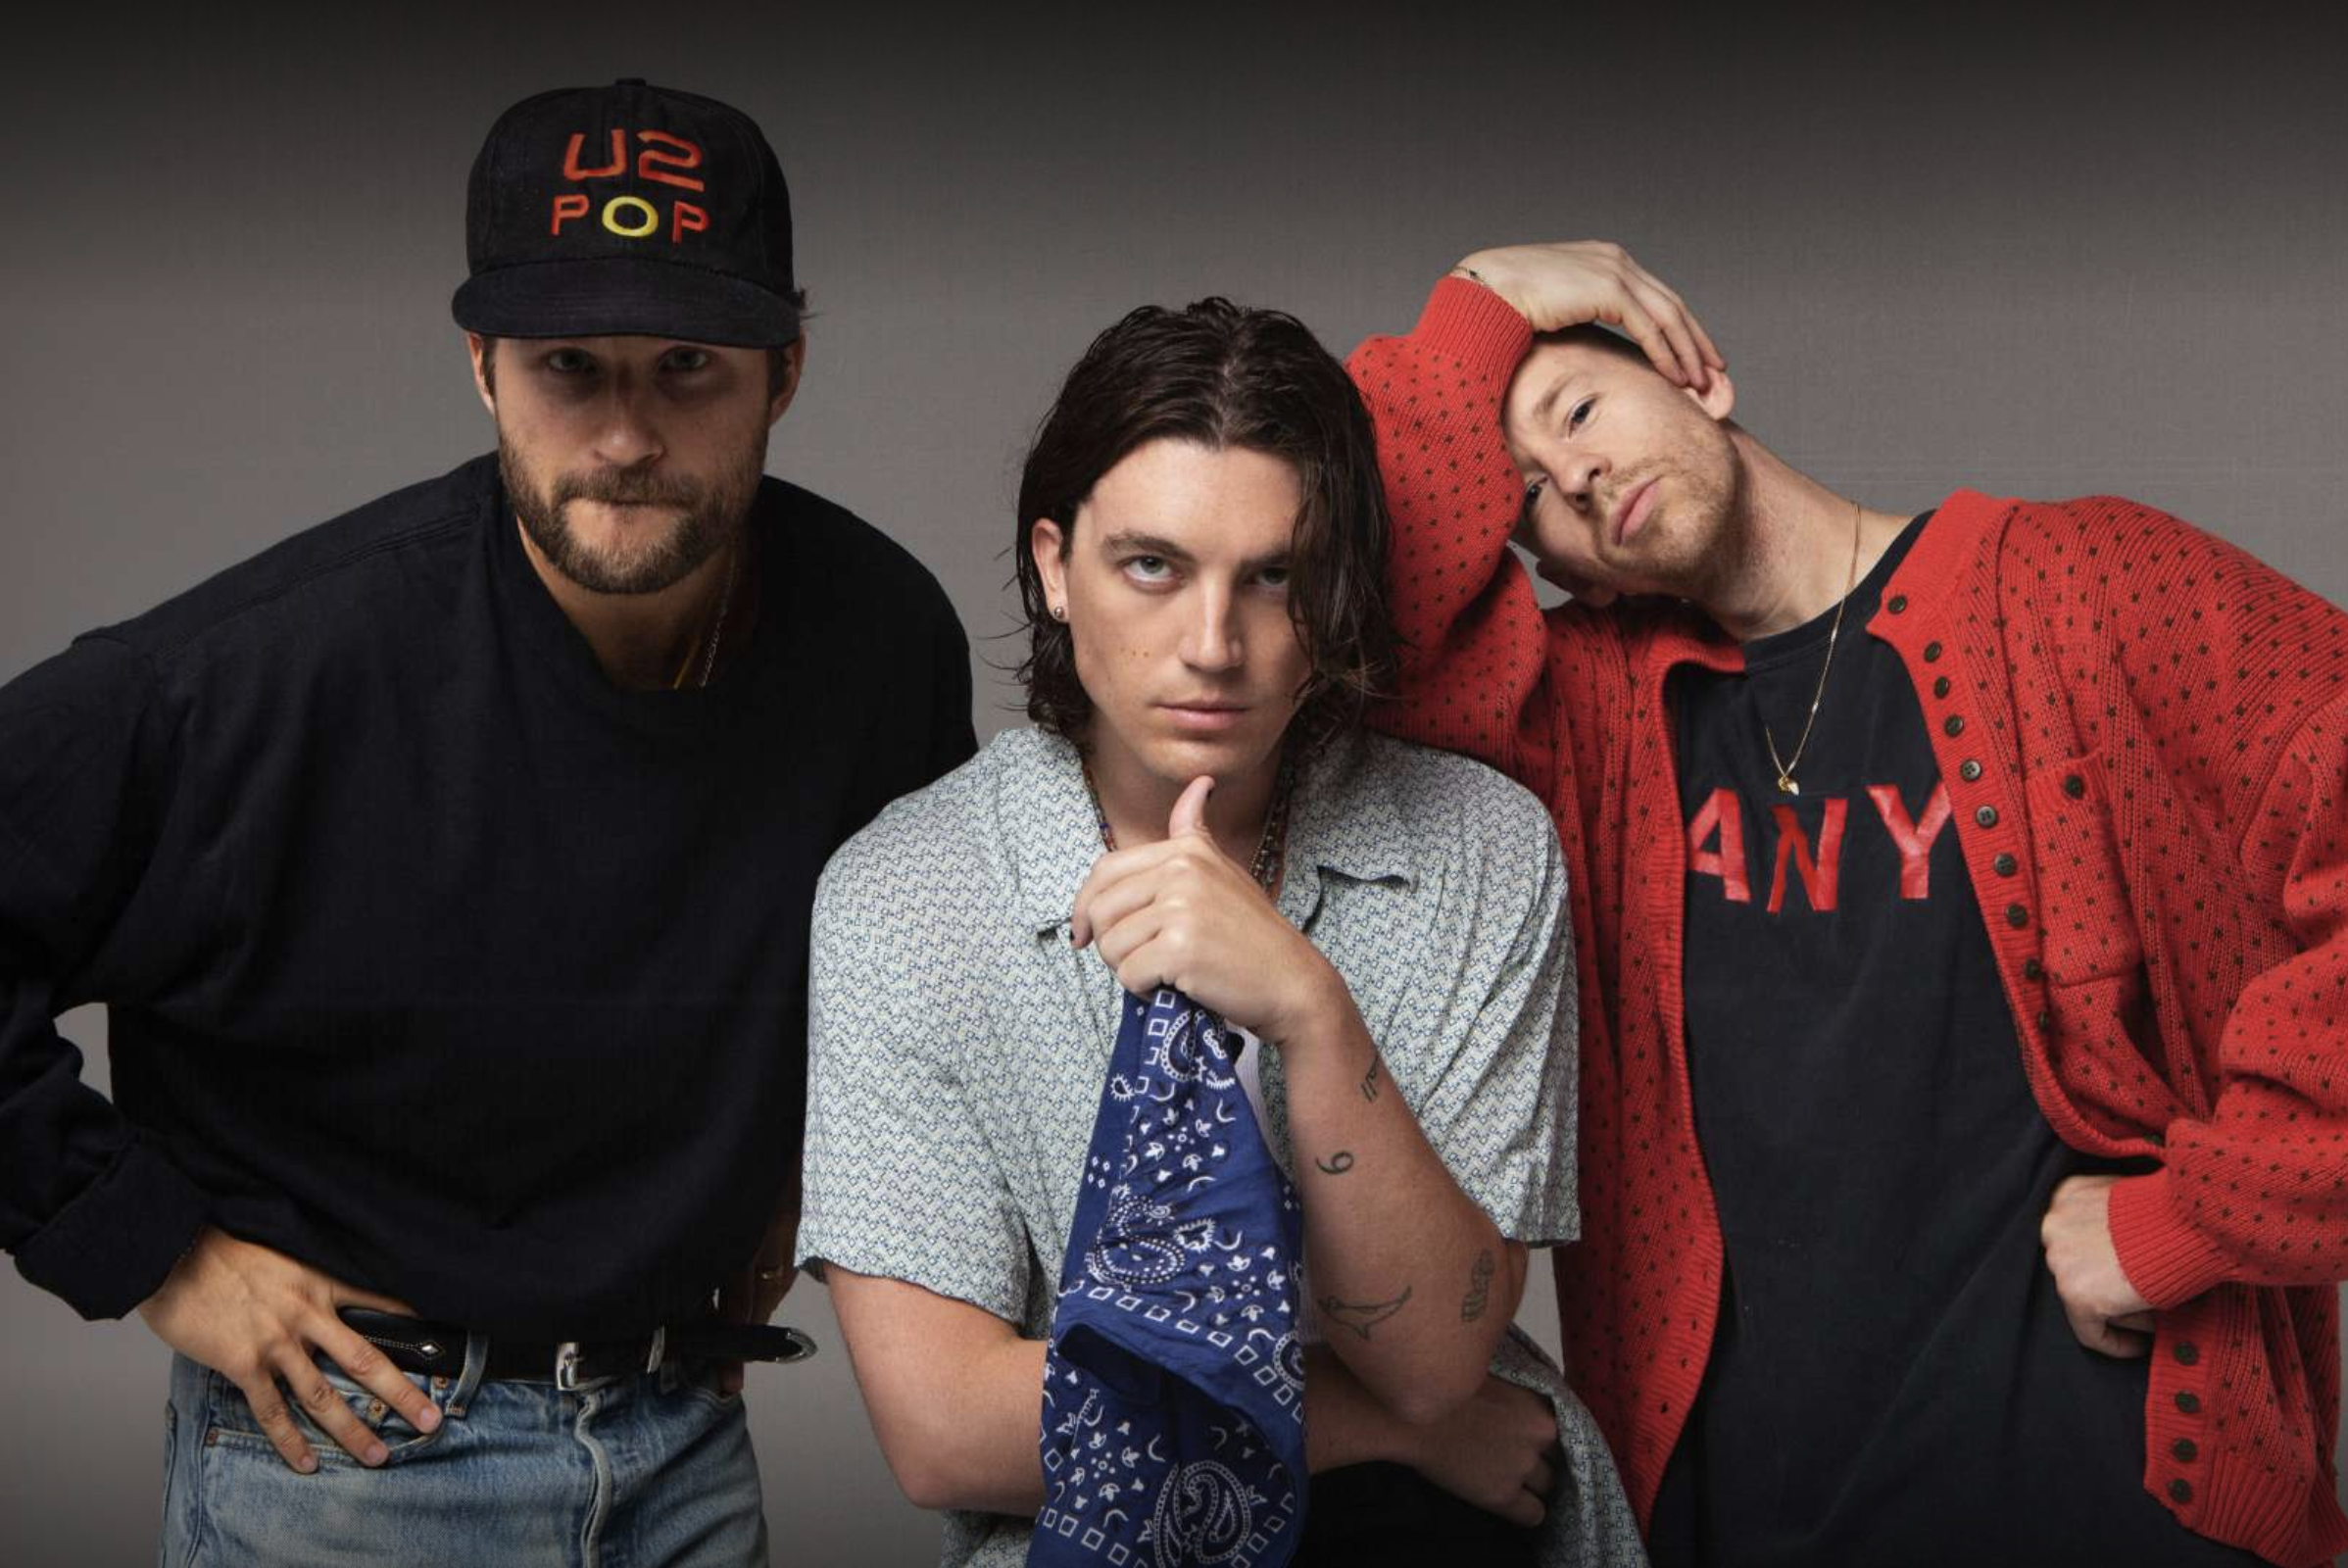 LANY – Interview